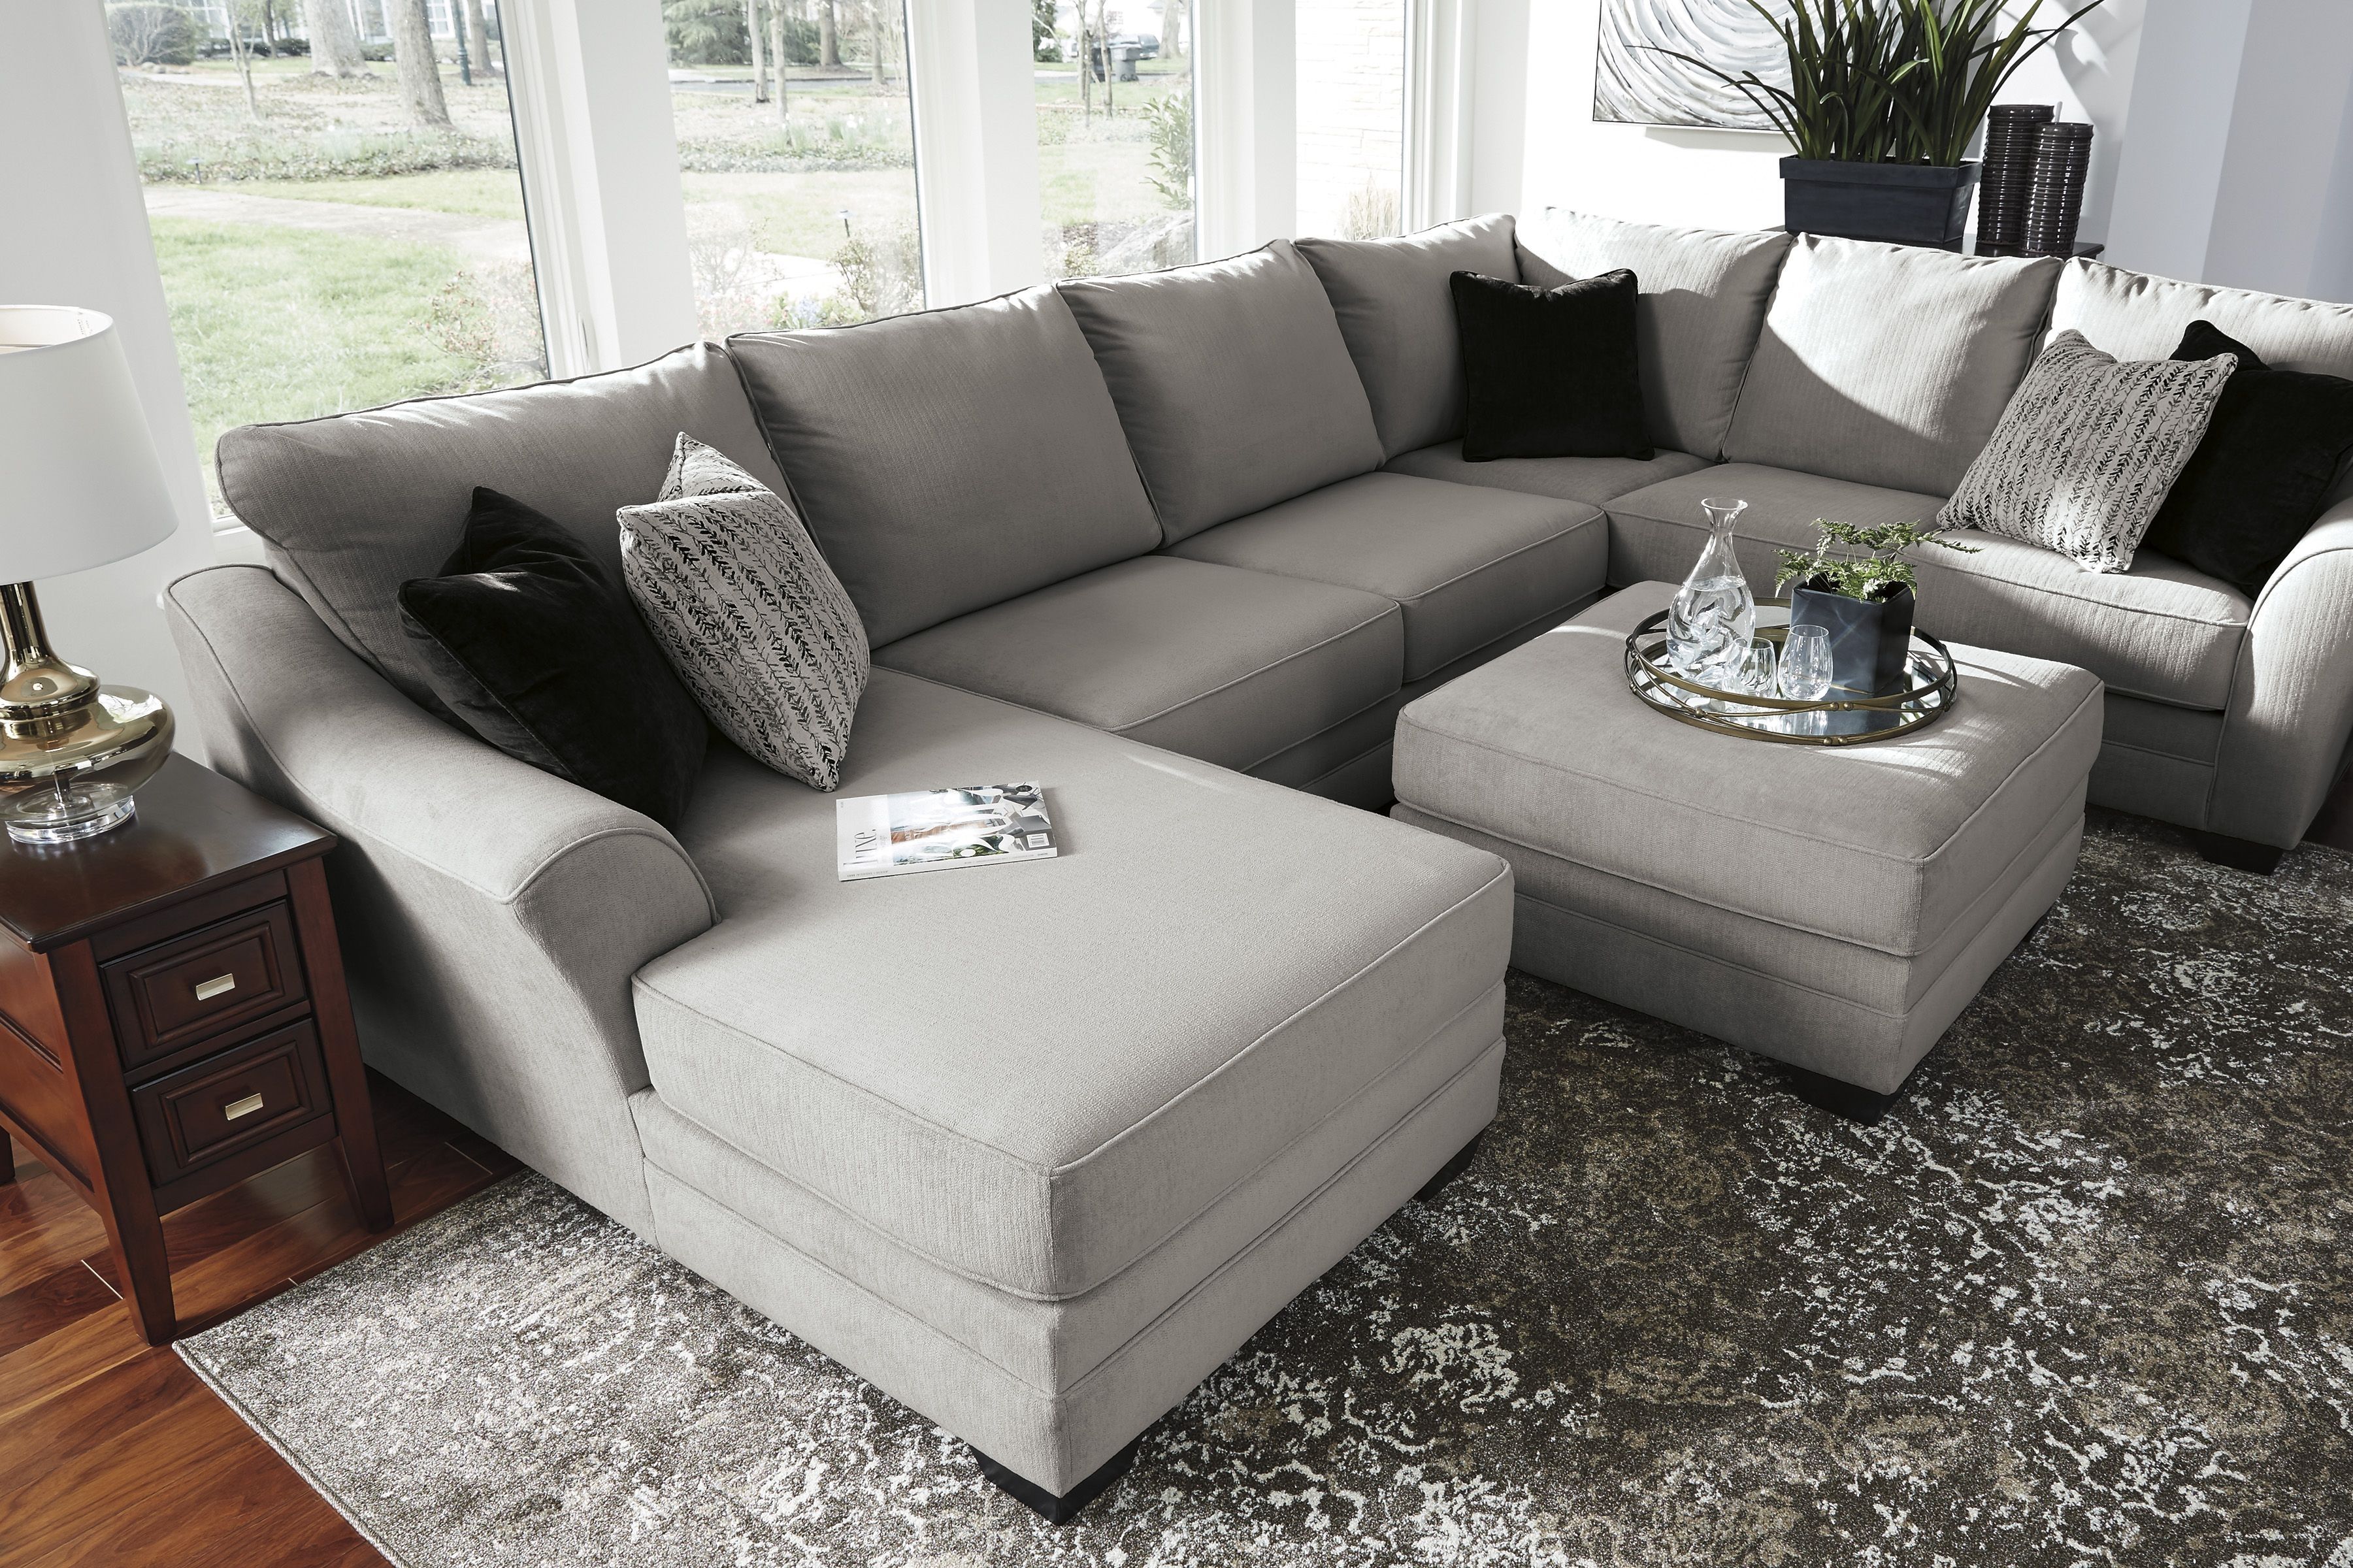 Palempor 3 Piece Laf Sectional In 2018 | Home Is Where The Heart Is With Norfolk Grey 3 Piece Sectionals With Laf Chaise (View 12 of 30)